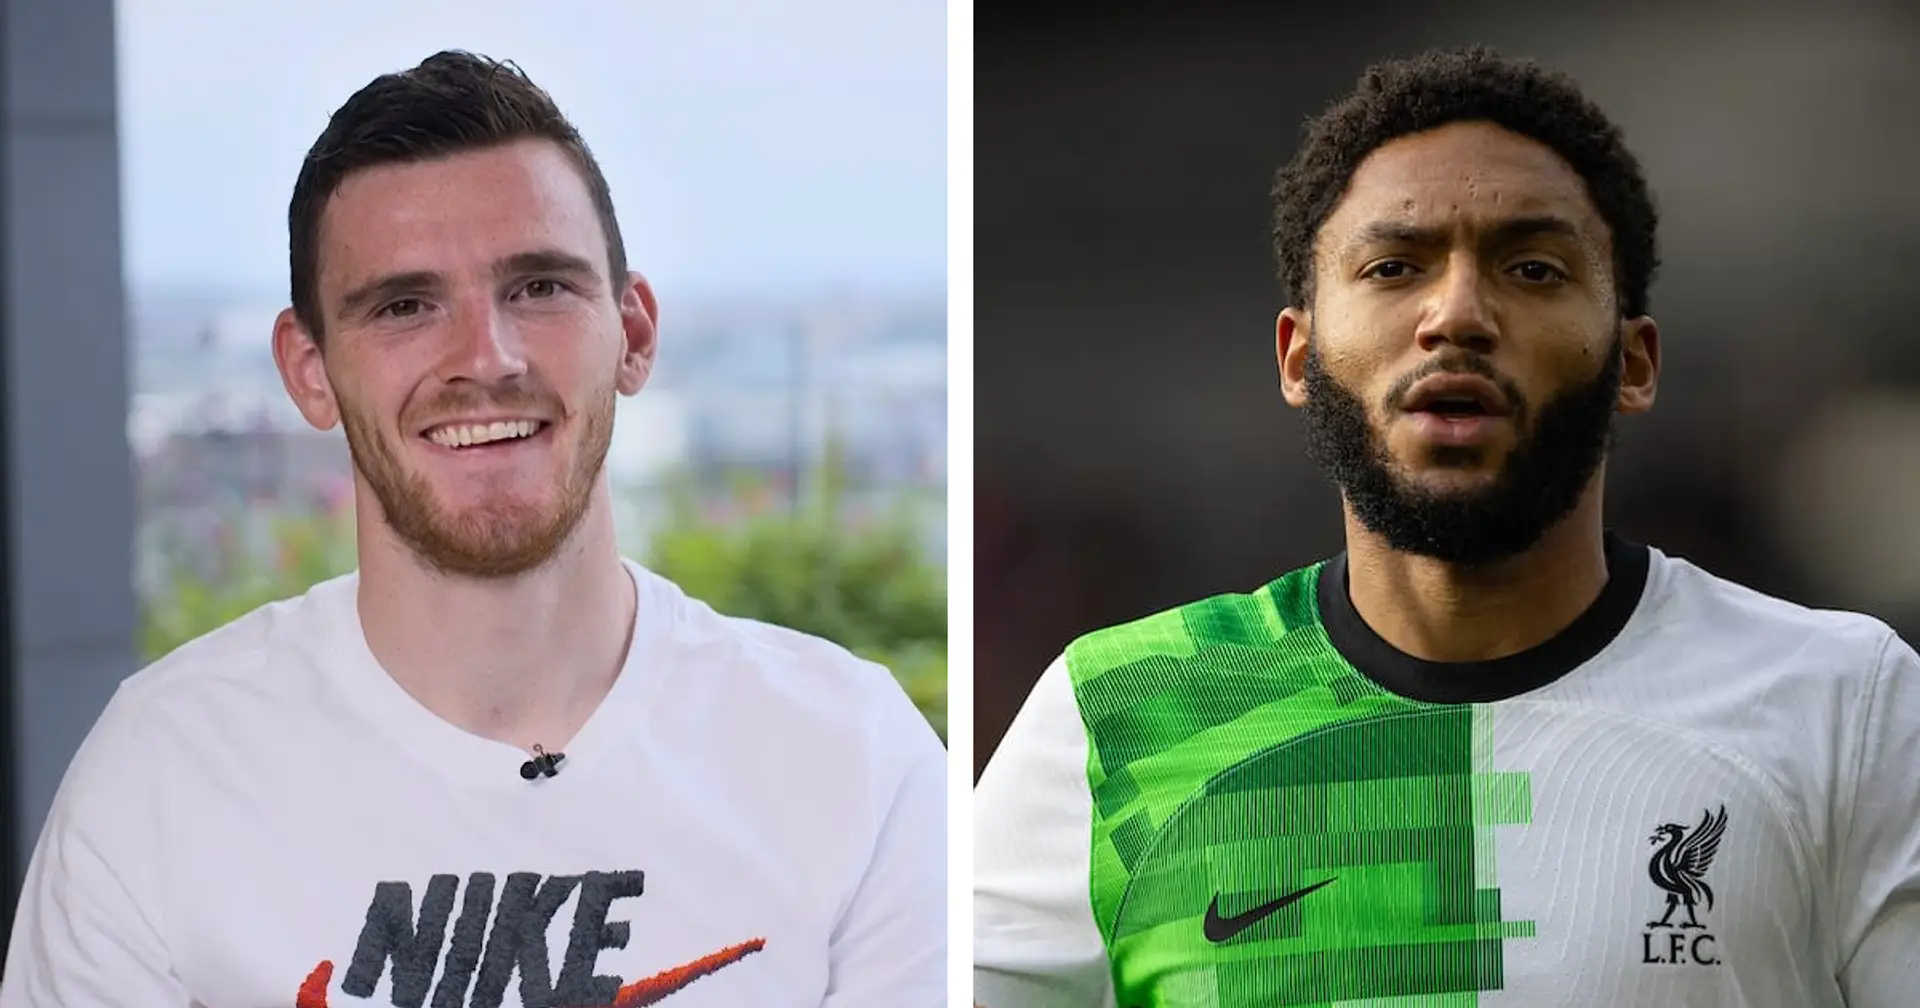 'Stop that shooting too much': Andy Robertson claims Joe Gomez 'pretty close' to historic debut Liverpool goal